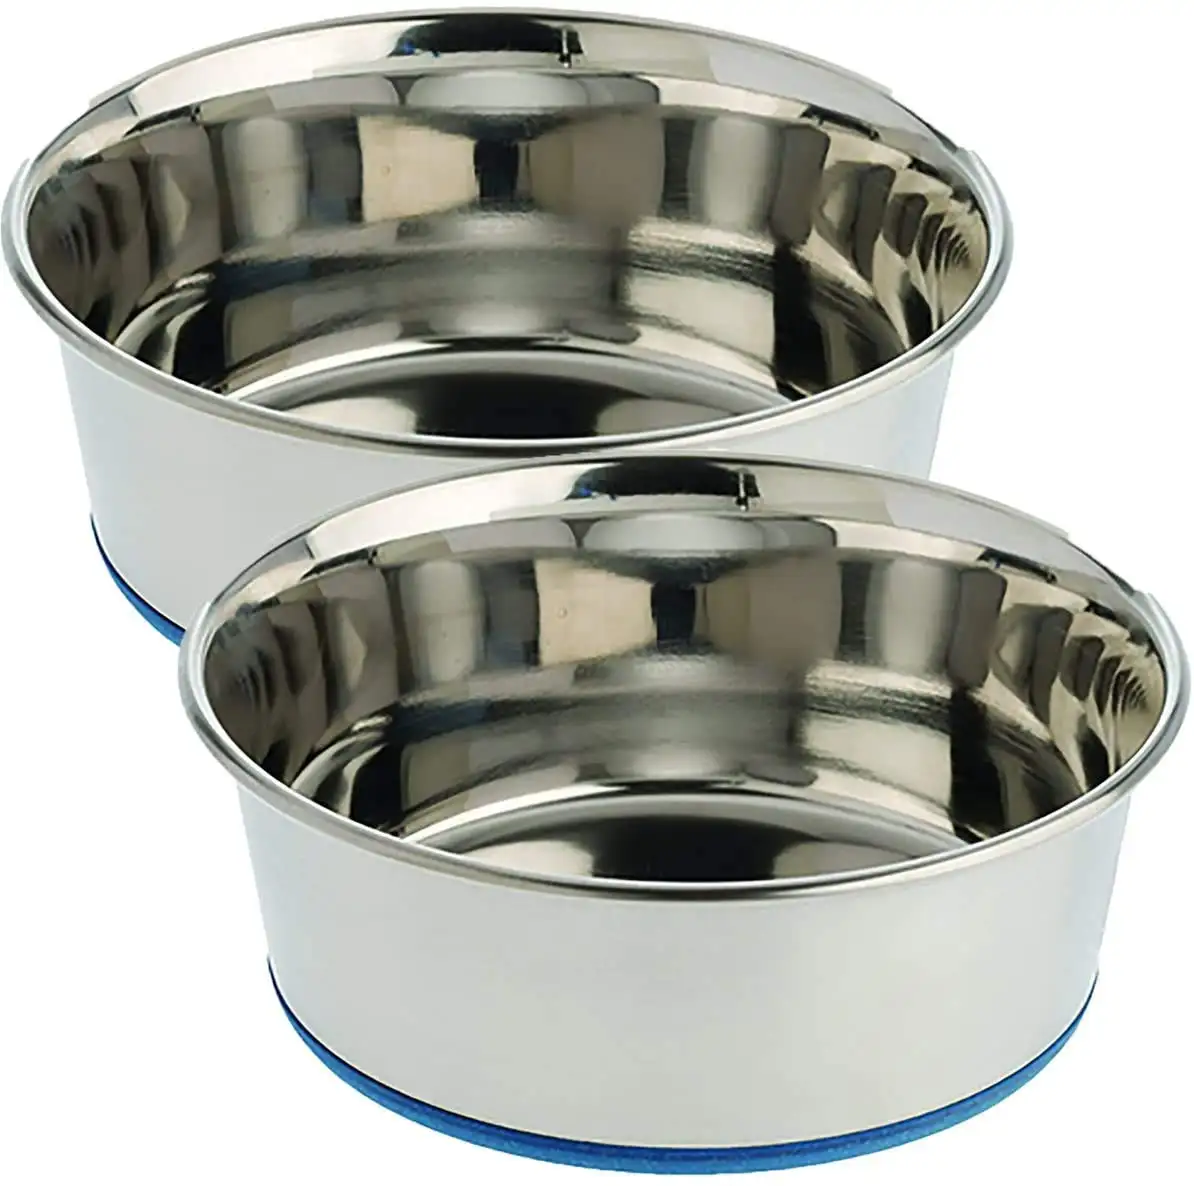 Hot Selling Item Stainless Steel Pet Bowls for Cats and Dogs Non-Slip Rubber Bases Dog Food Water Bowl